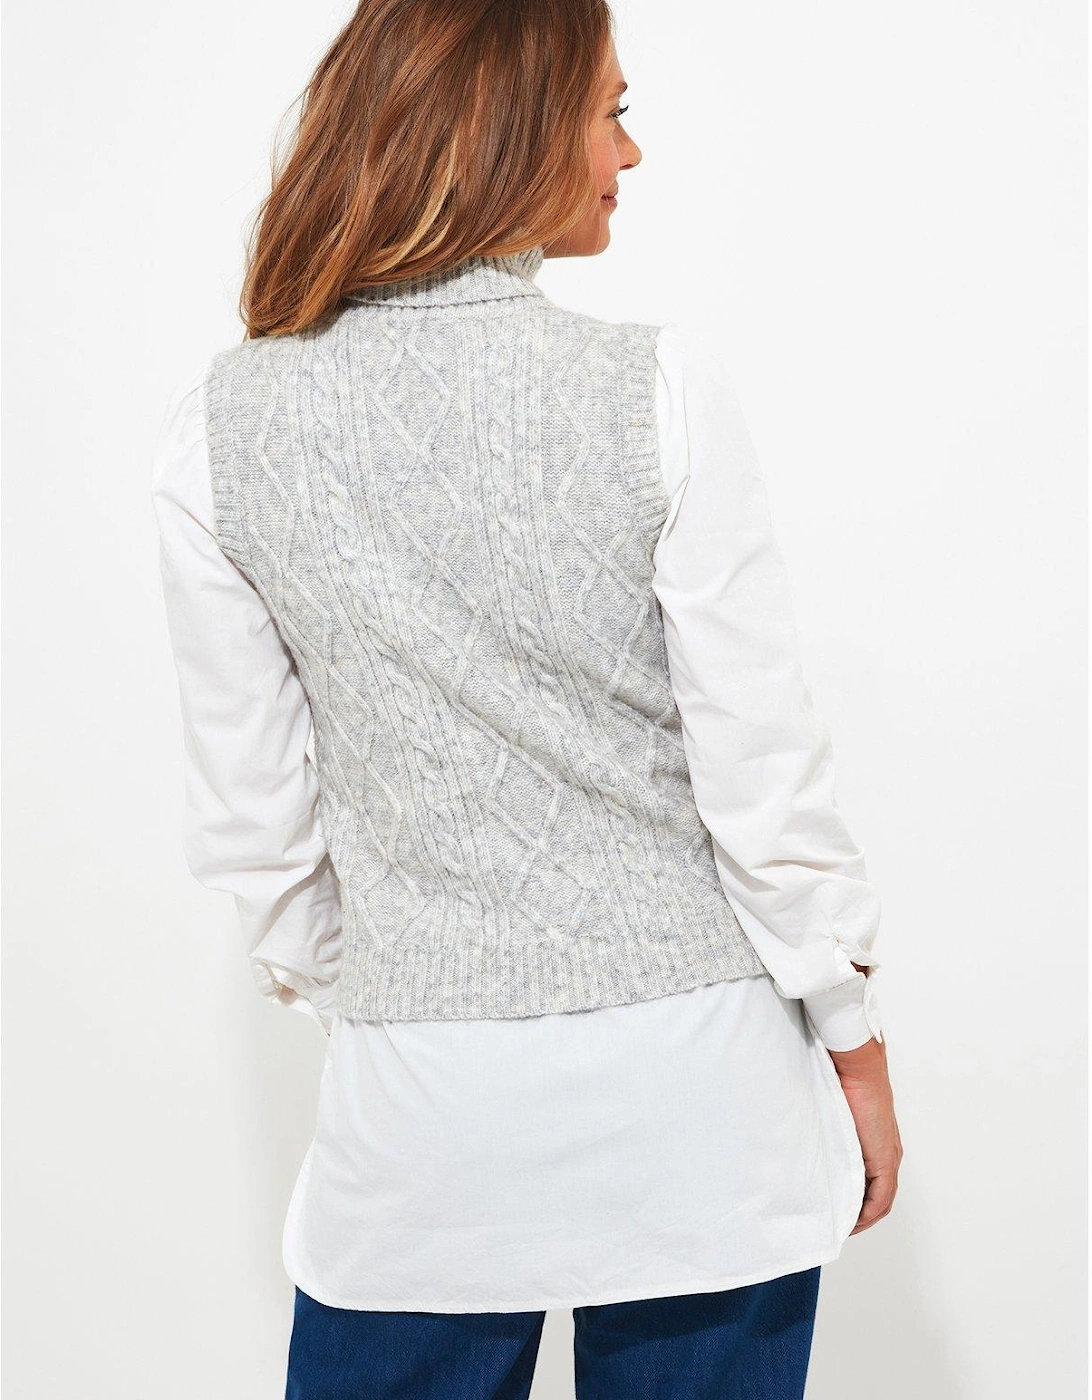 Charming Cable Knit Vest - Grey